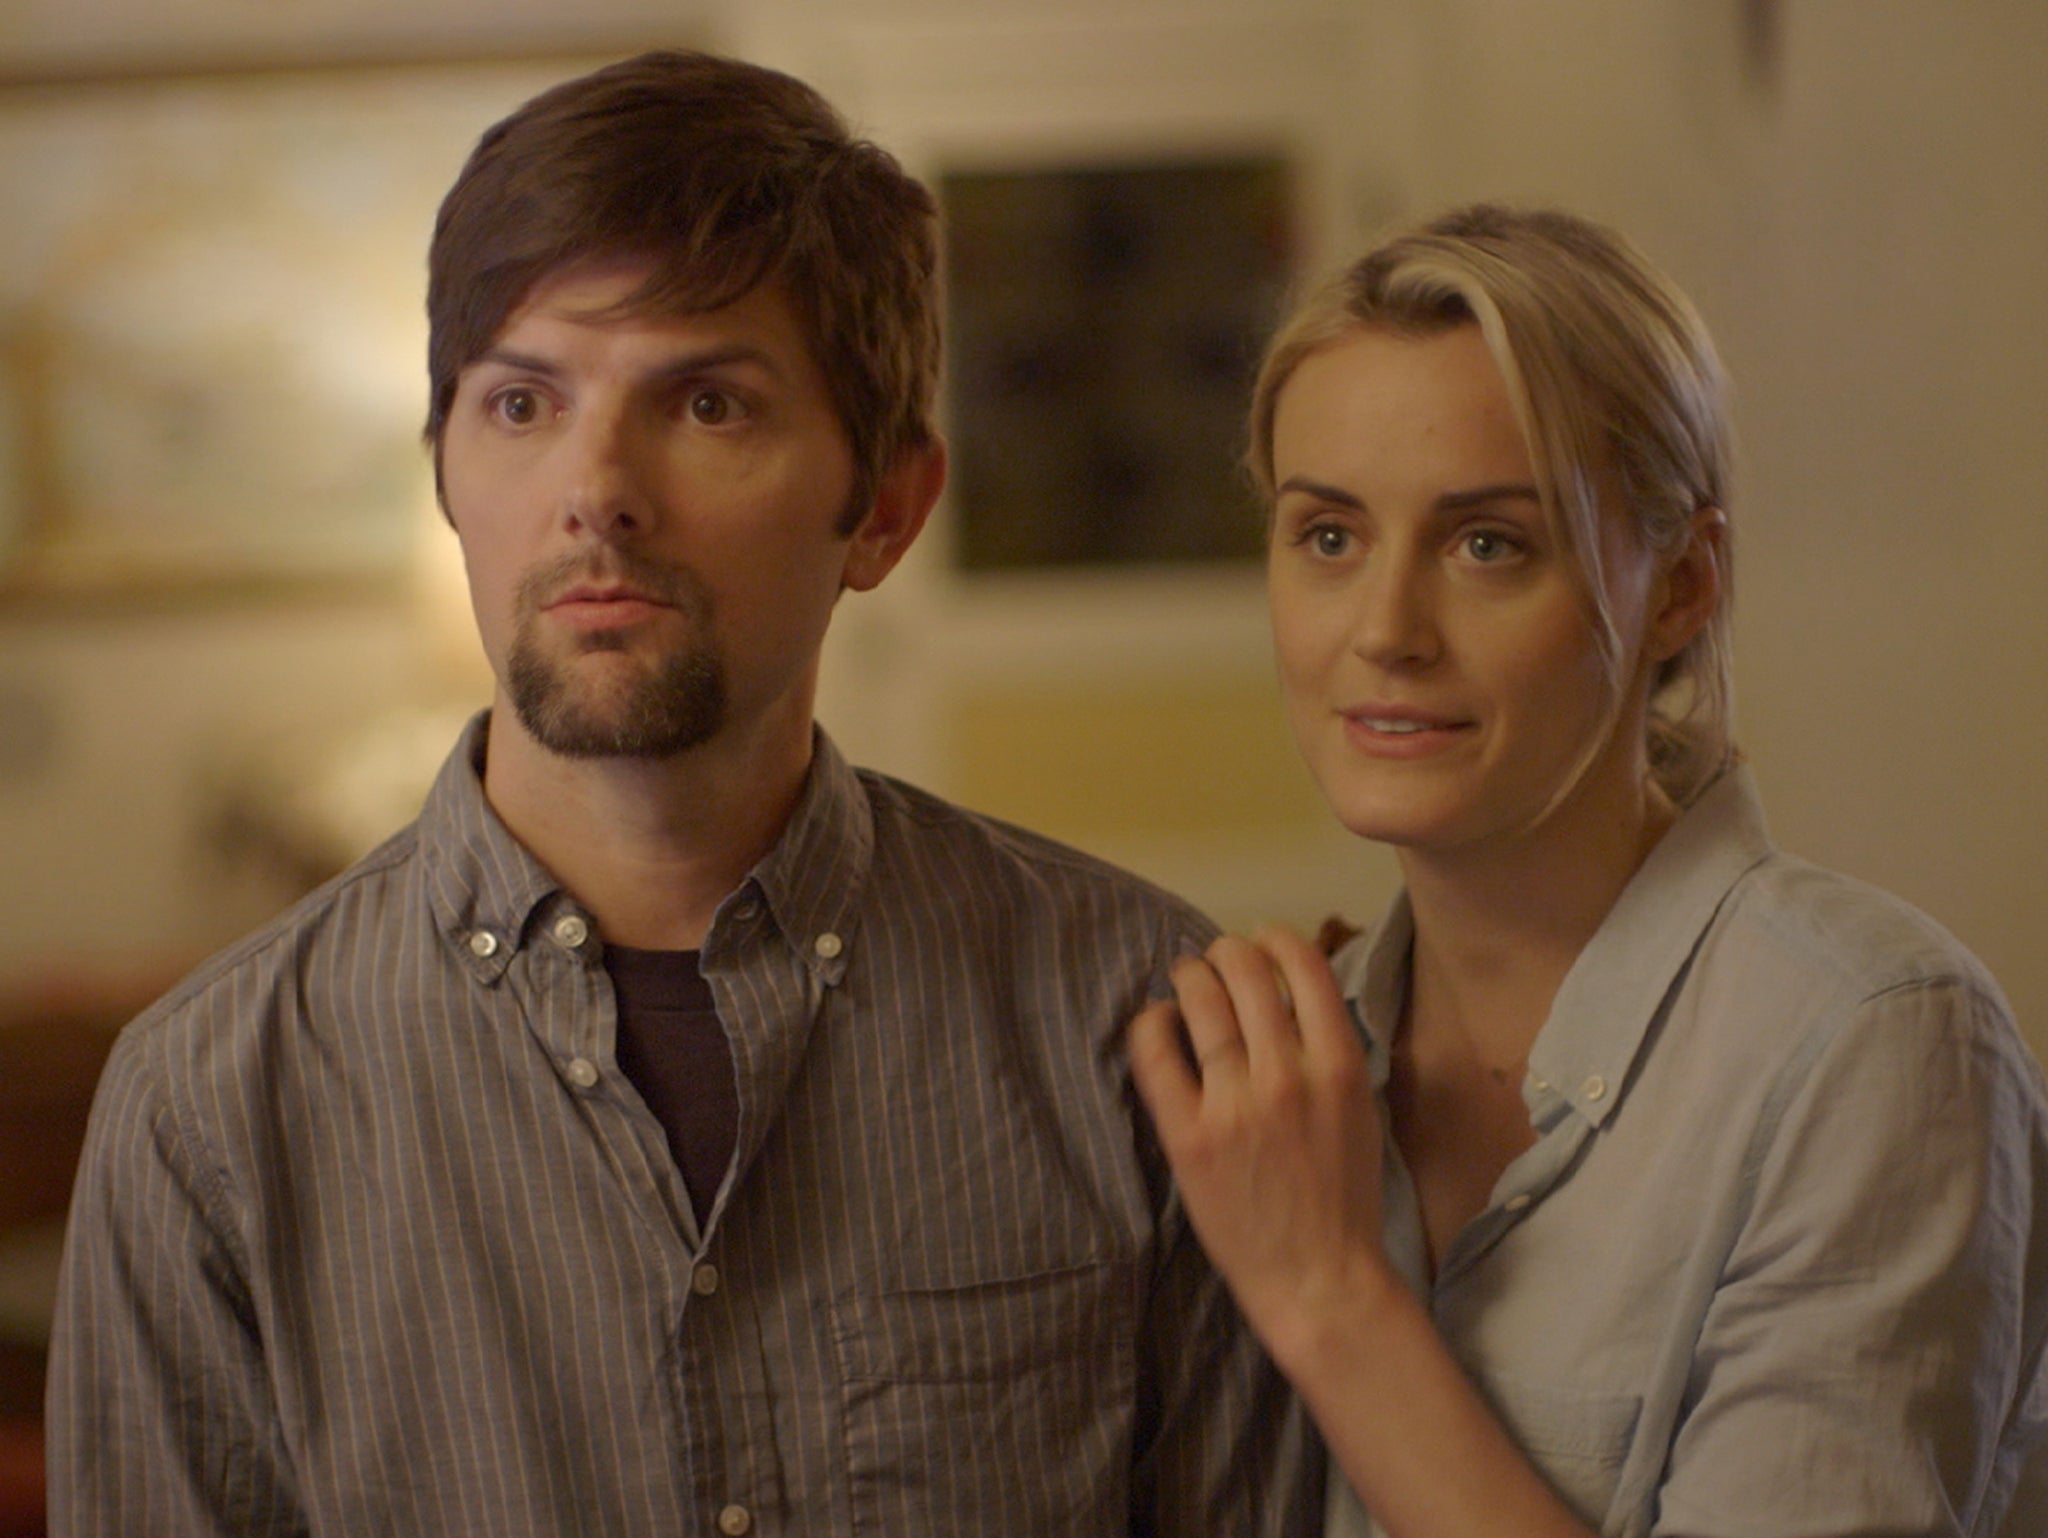 Taylor Shilling in a scene from The Overnight